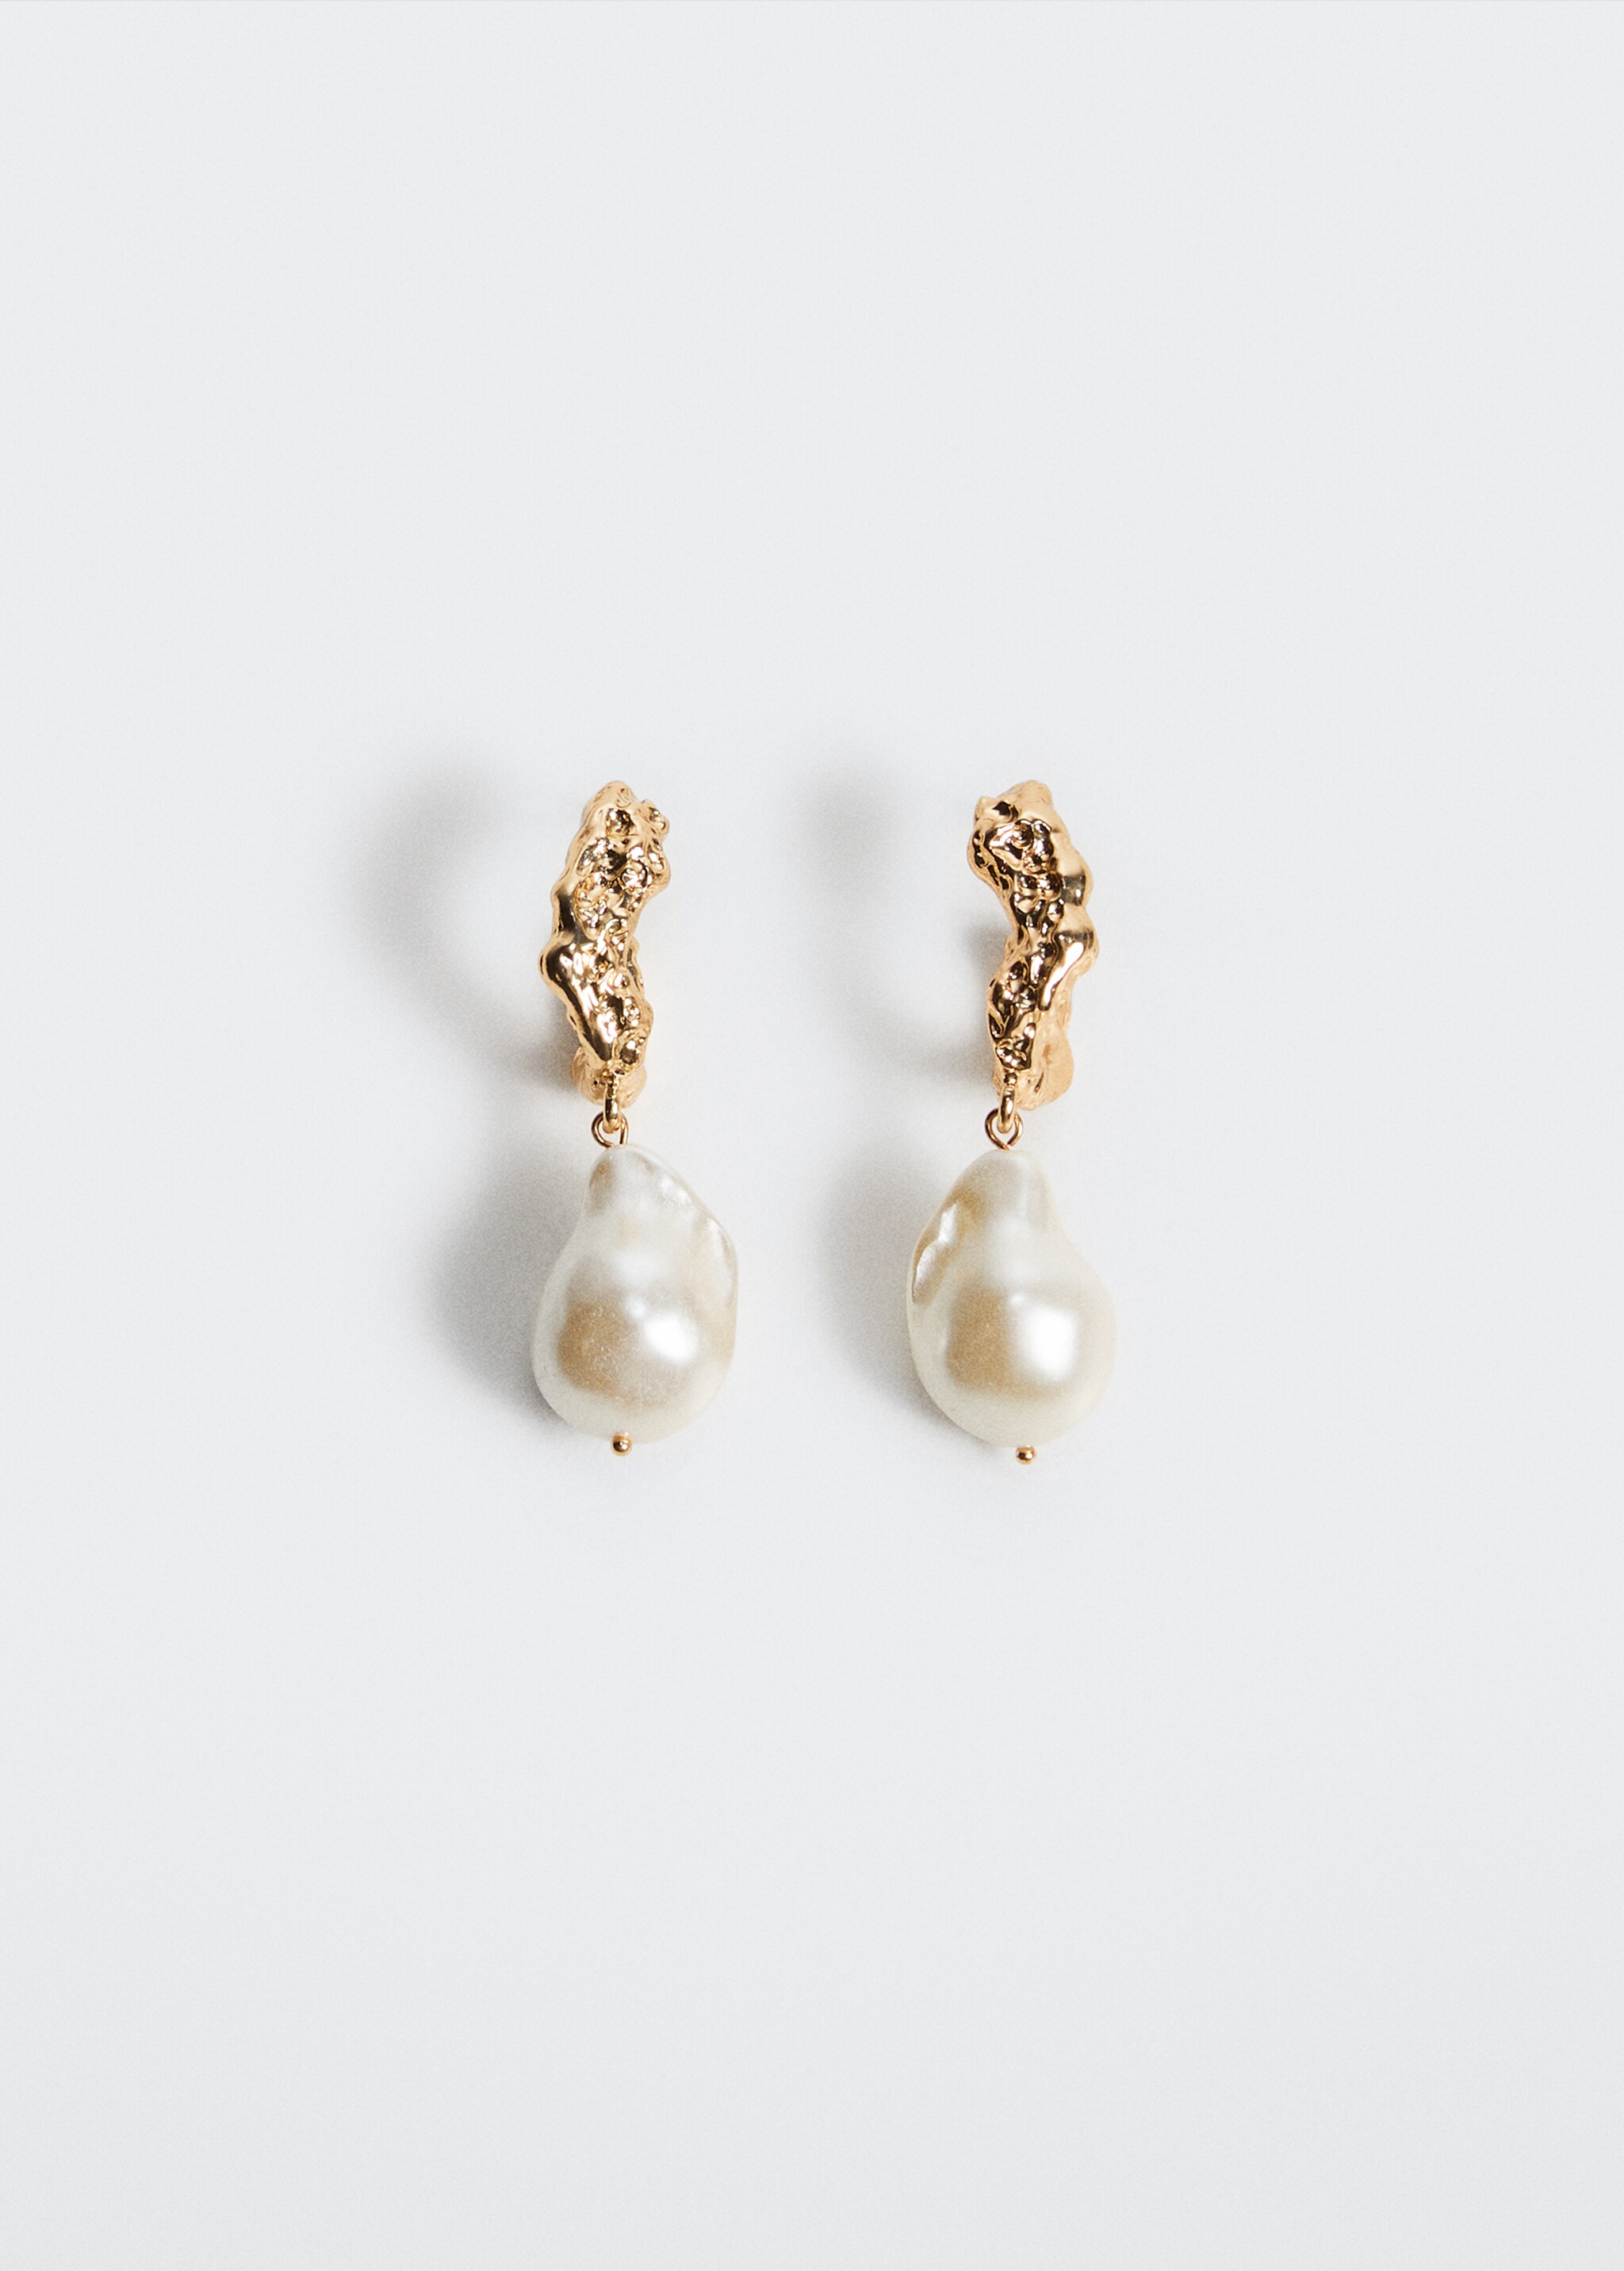 Pearl pendant earrings - Article without model